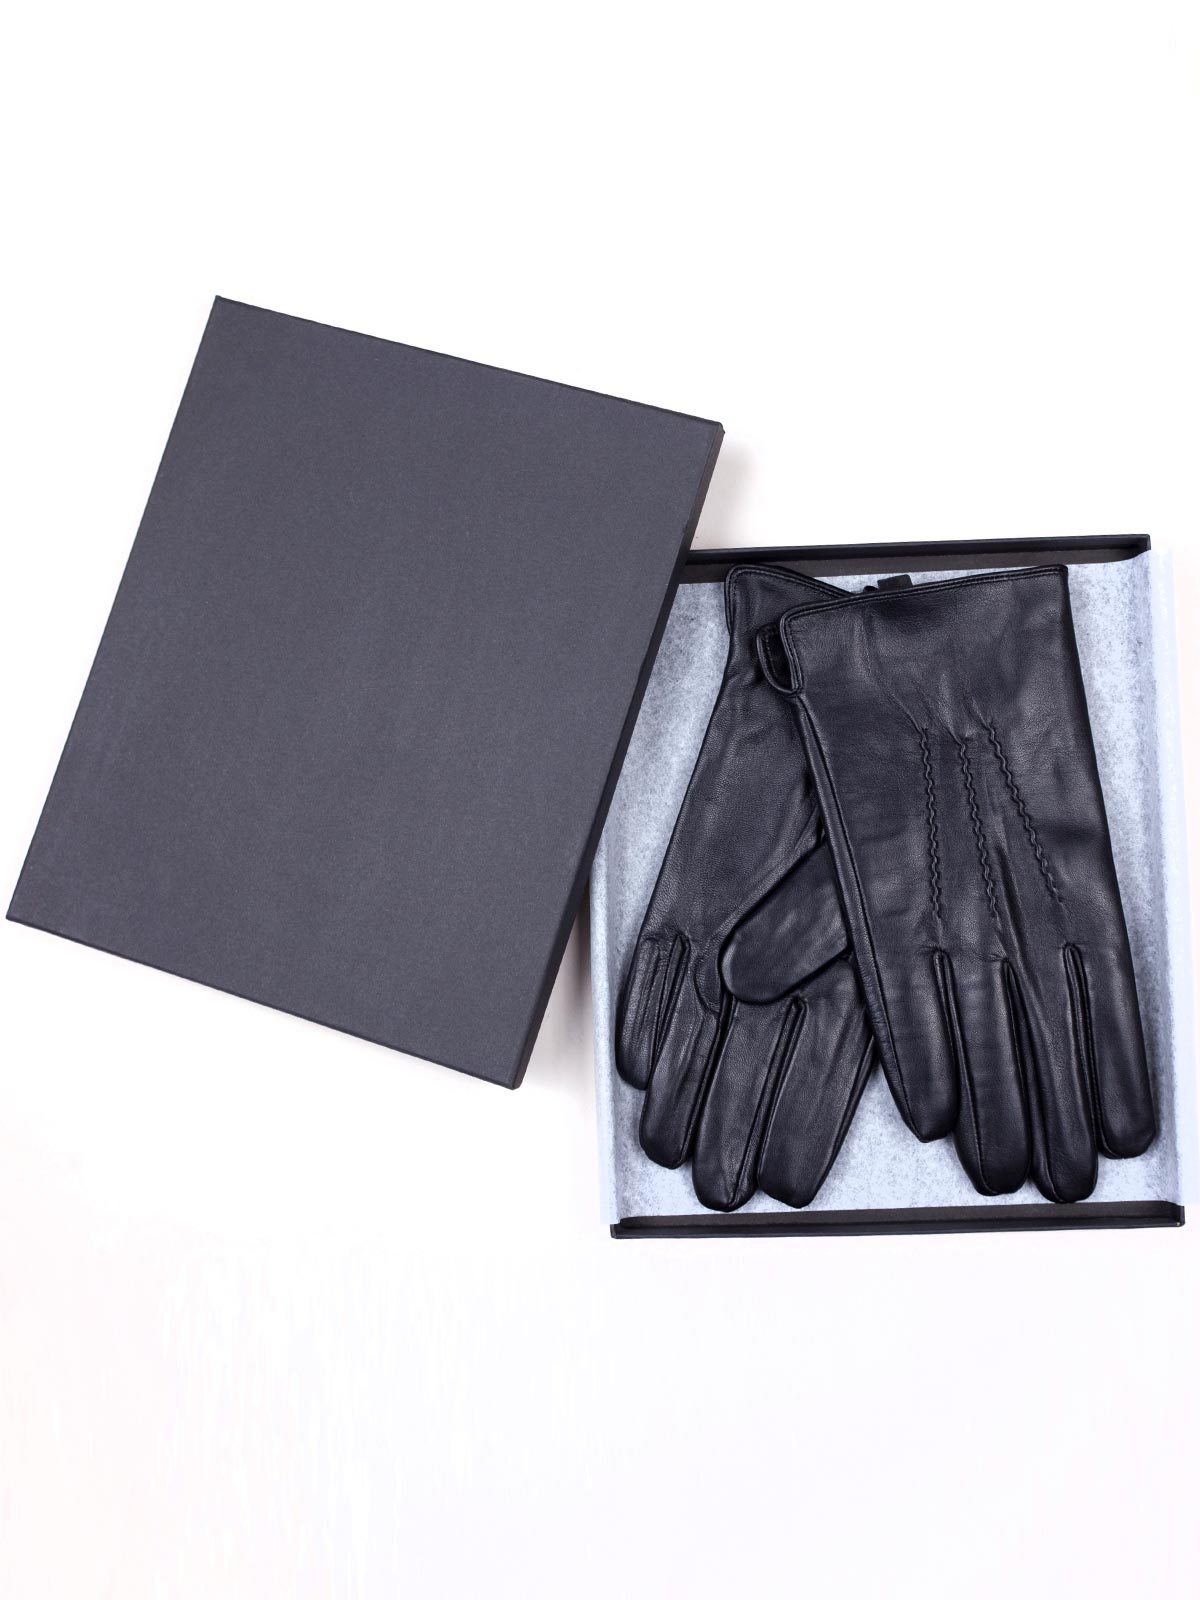  leather gloves with decorative stitchin - 10573 - € 31.50 img3